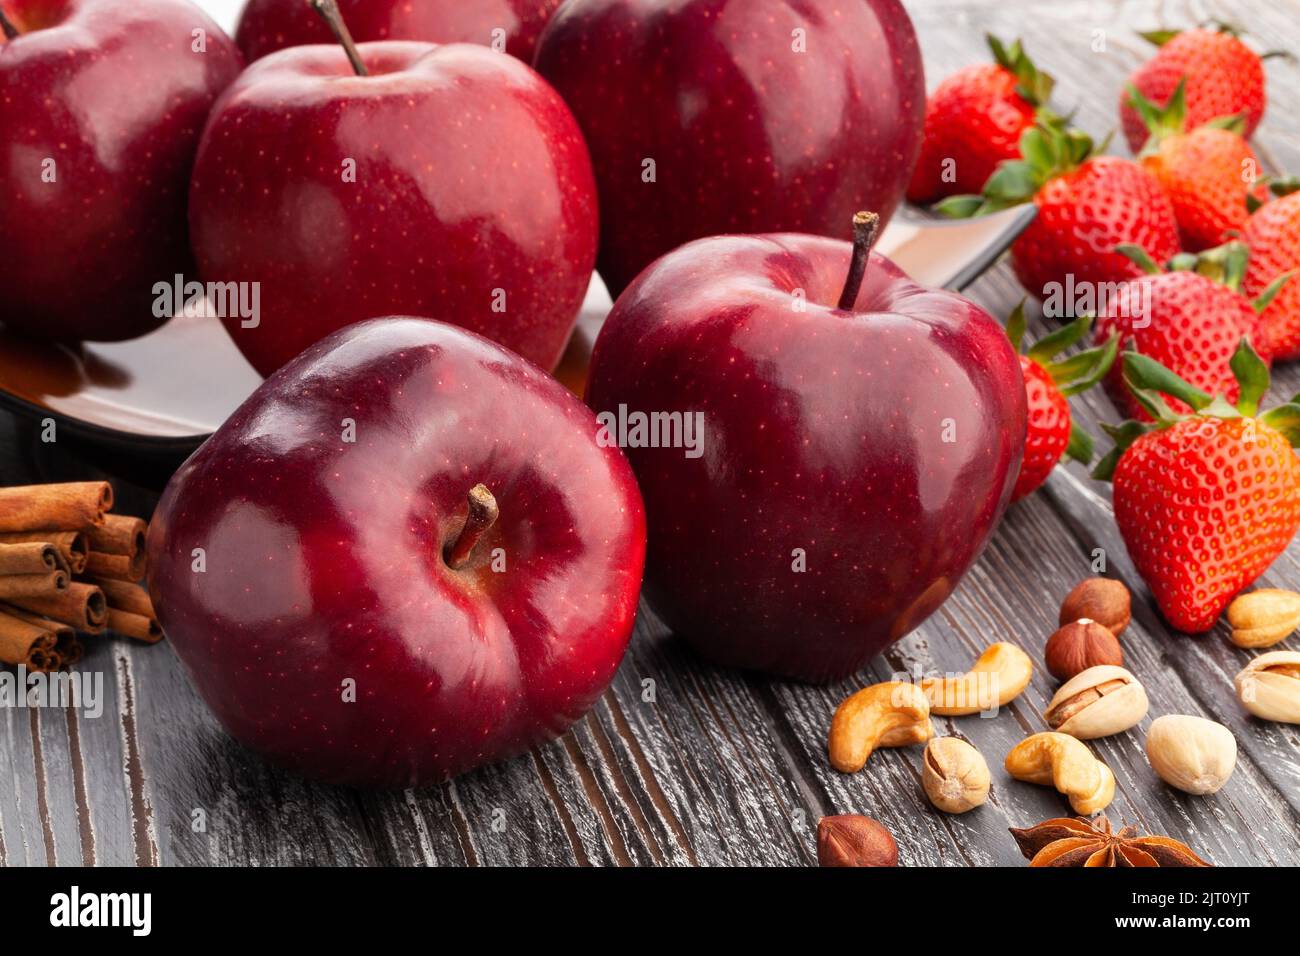 red delicious apple on wood background Stock Photo